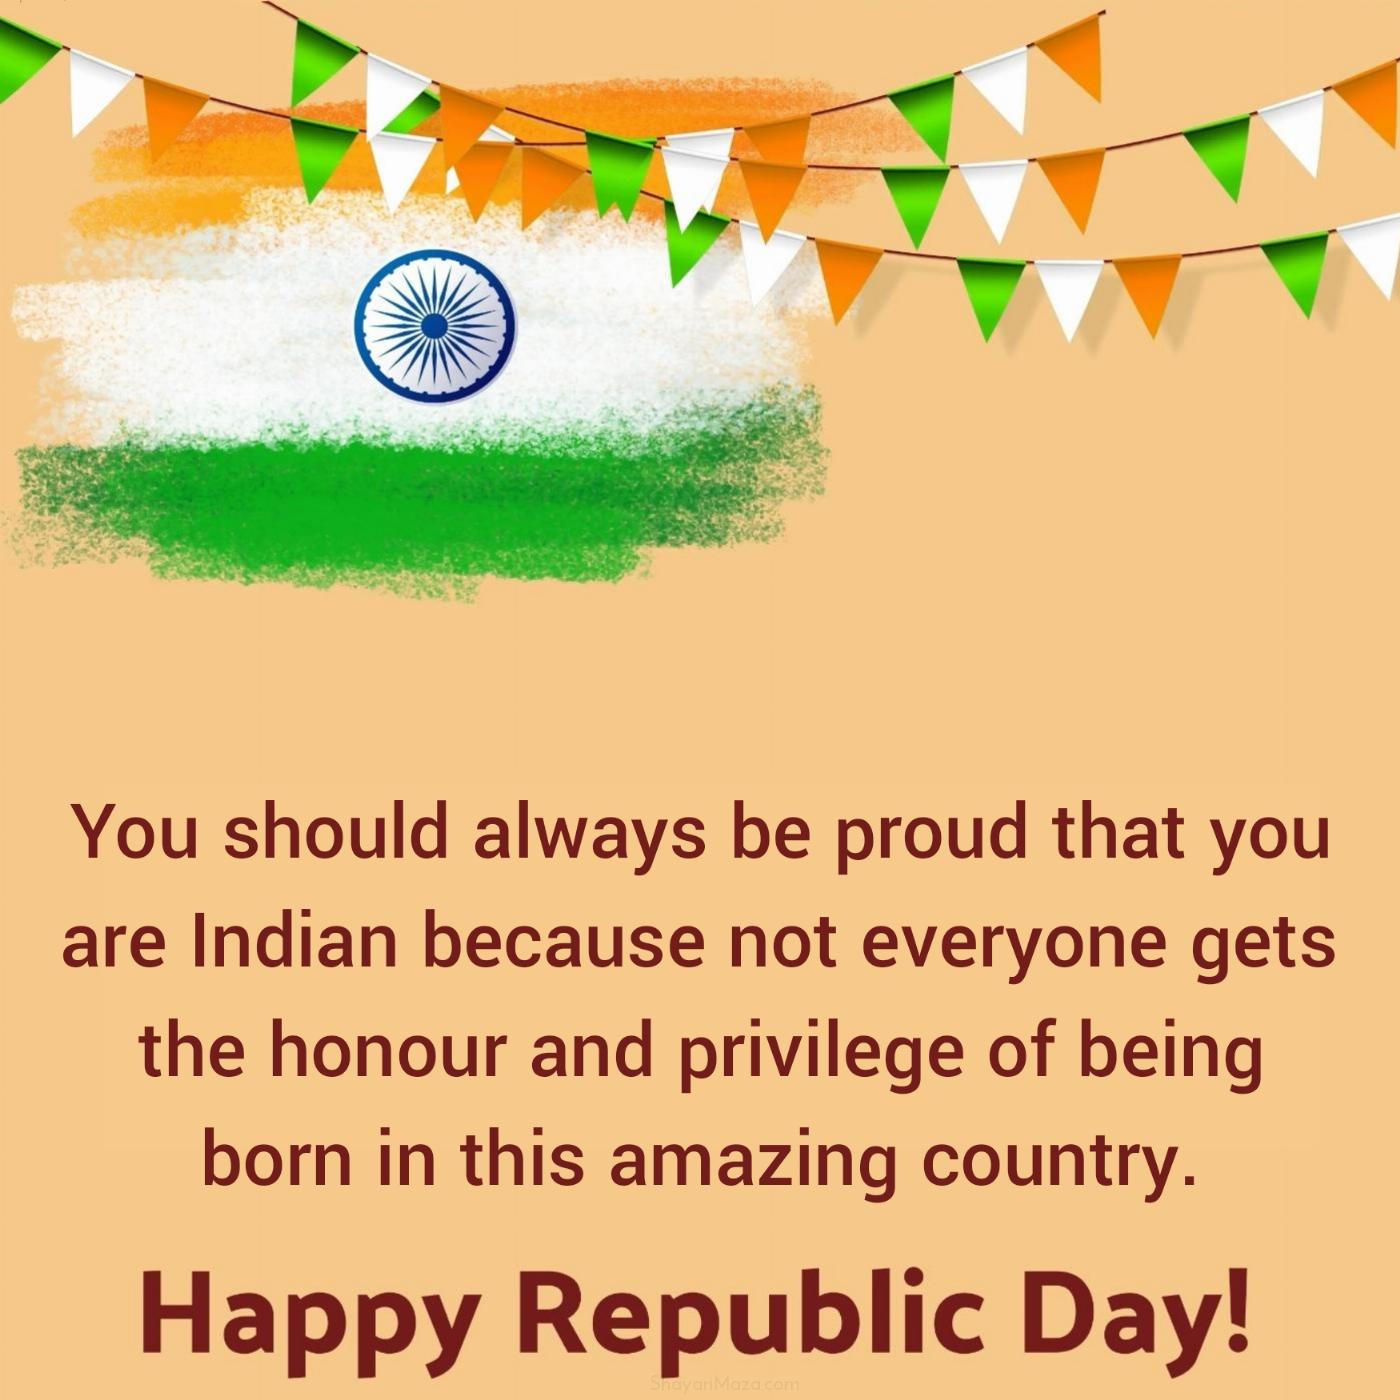 You should always be proud that you are Indian